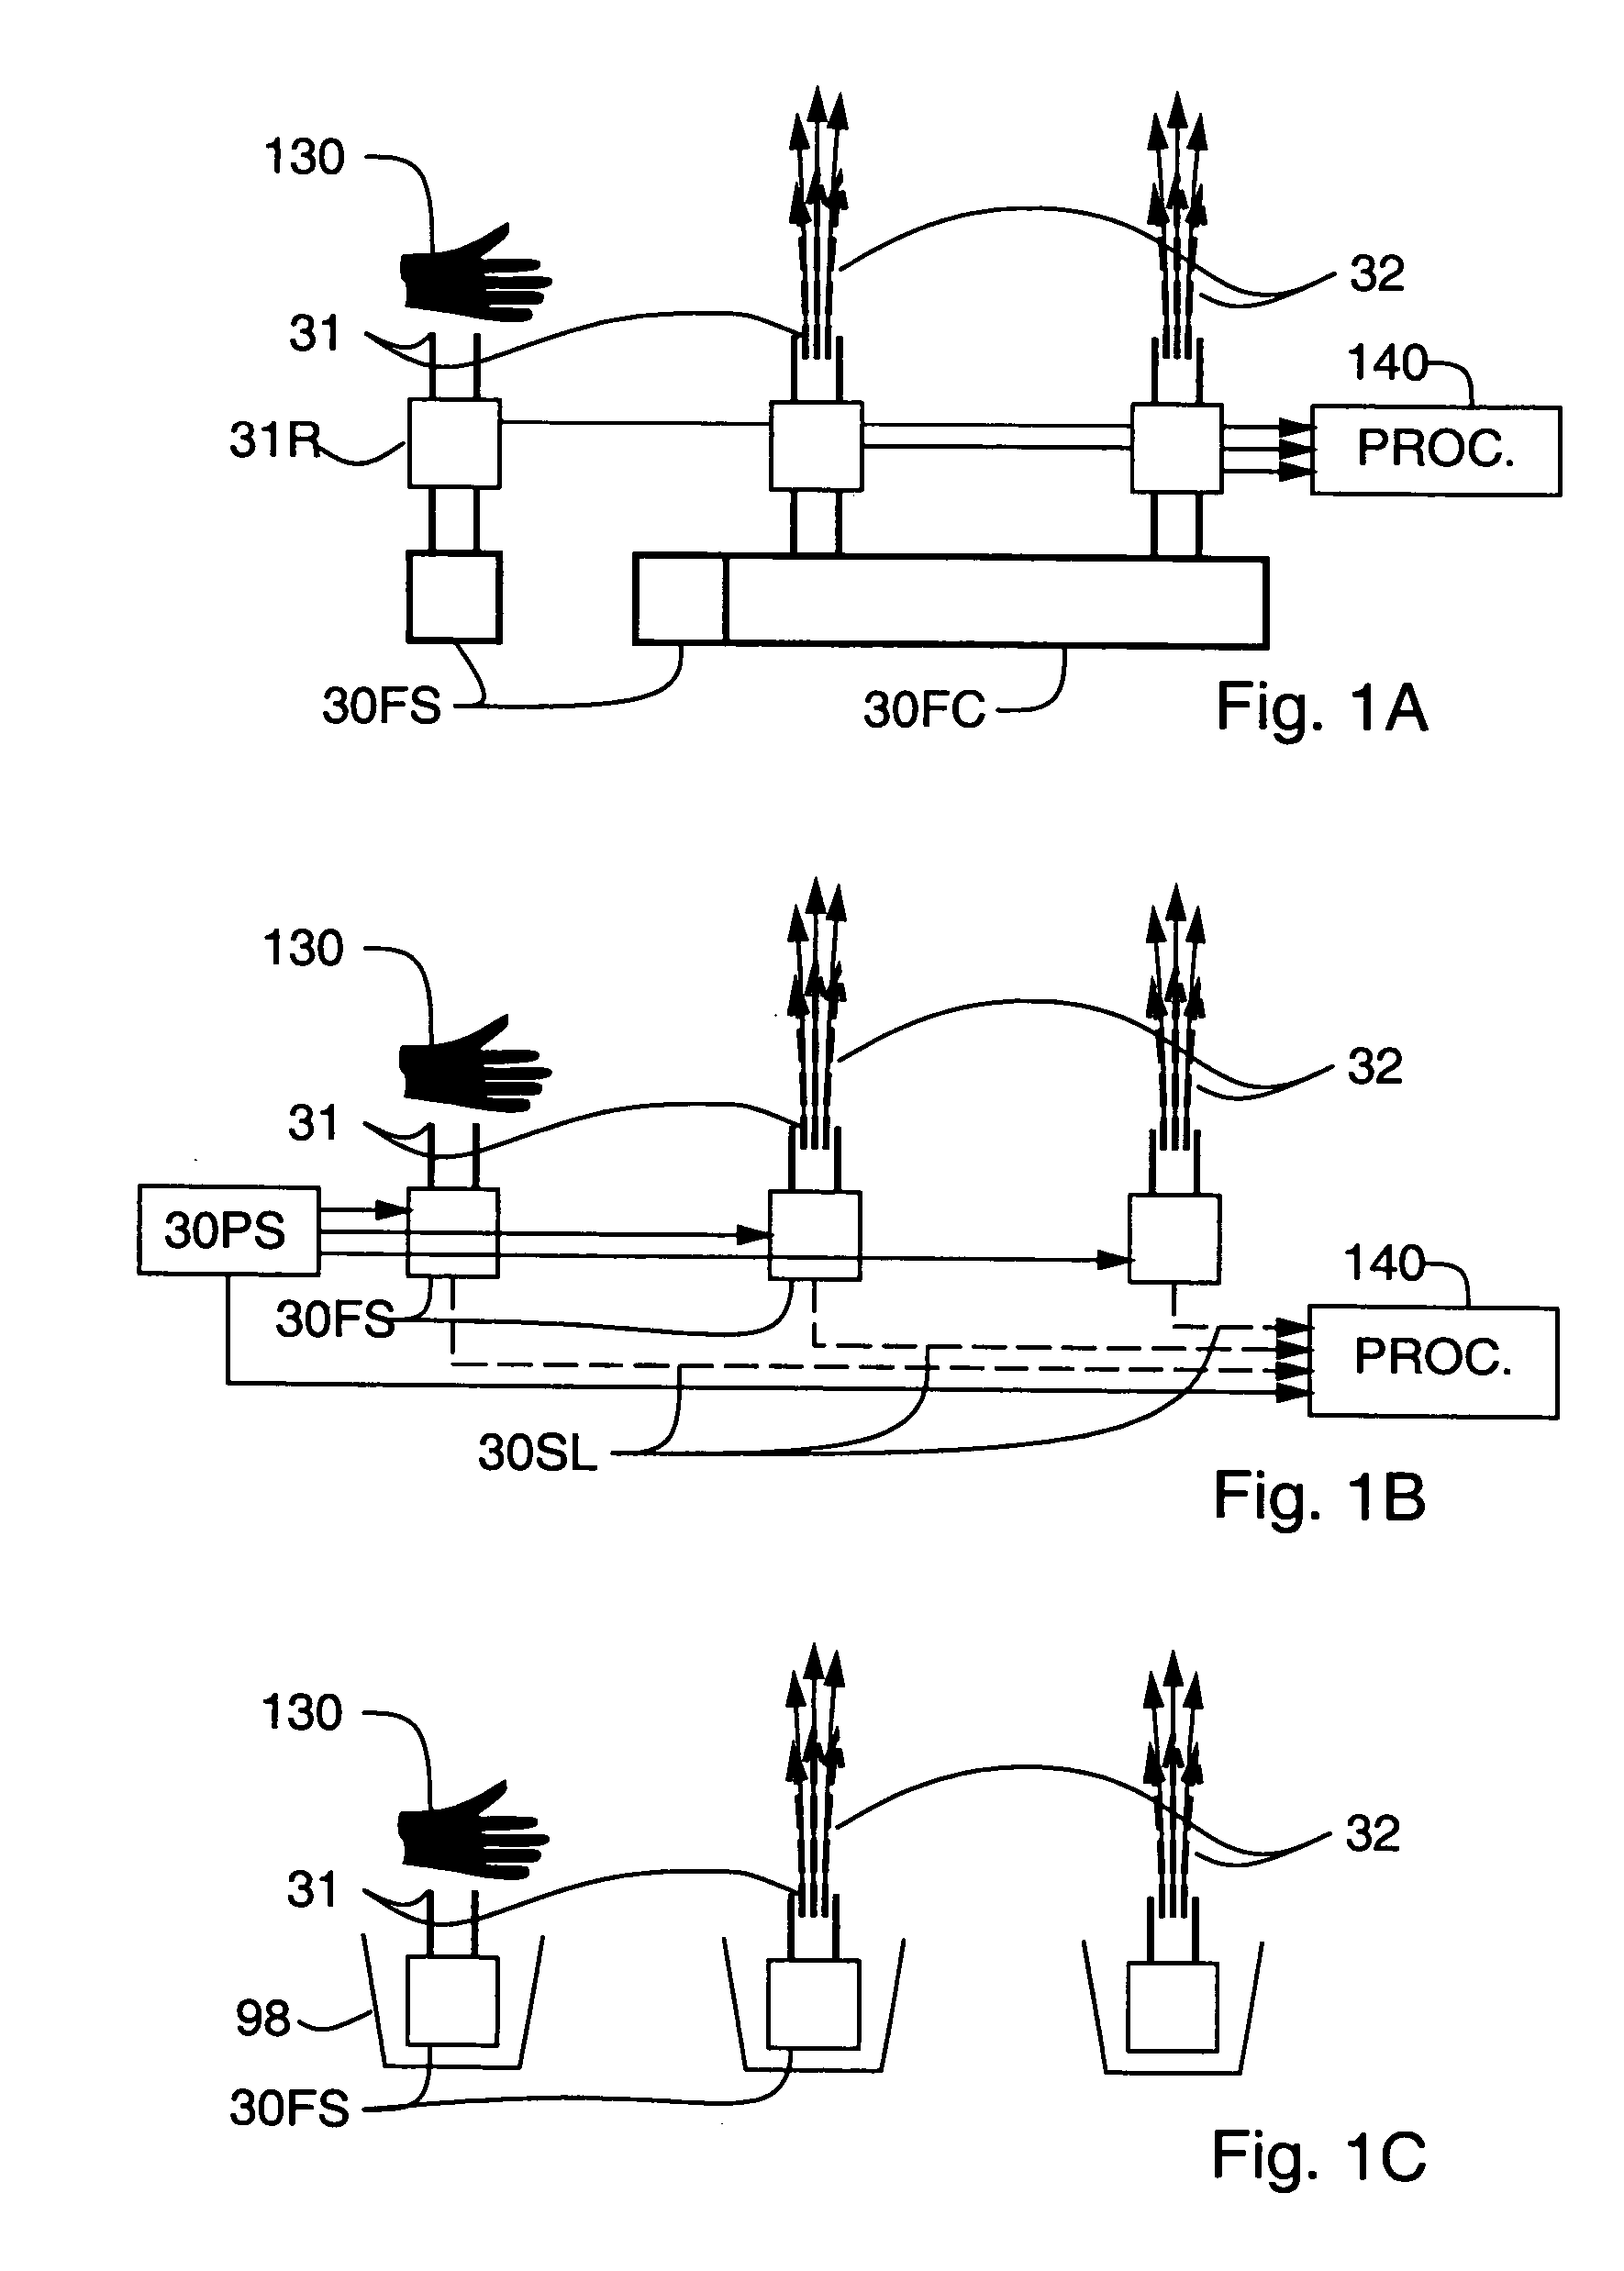 Fluid user interface such as immersive multimediator or input/output device with one or more spray jets